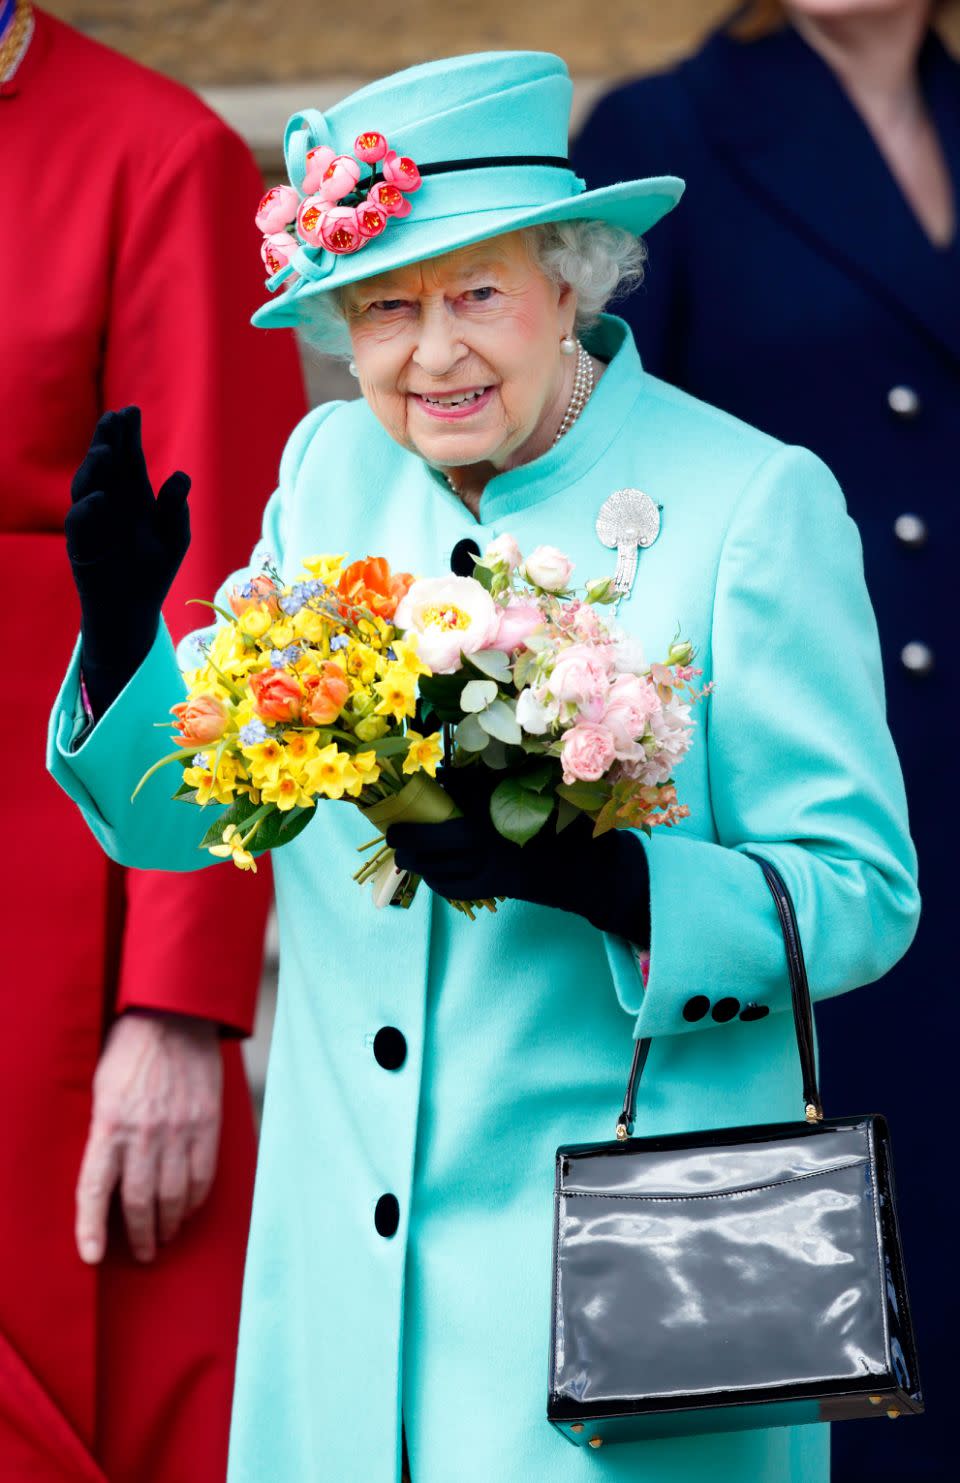 The Queen also uses her handbag to send signals. Photo: Getty